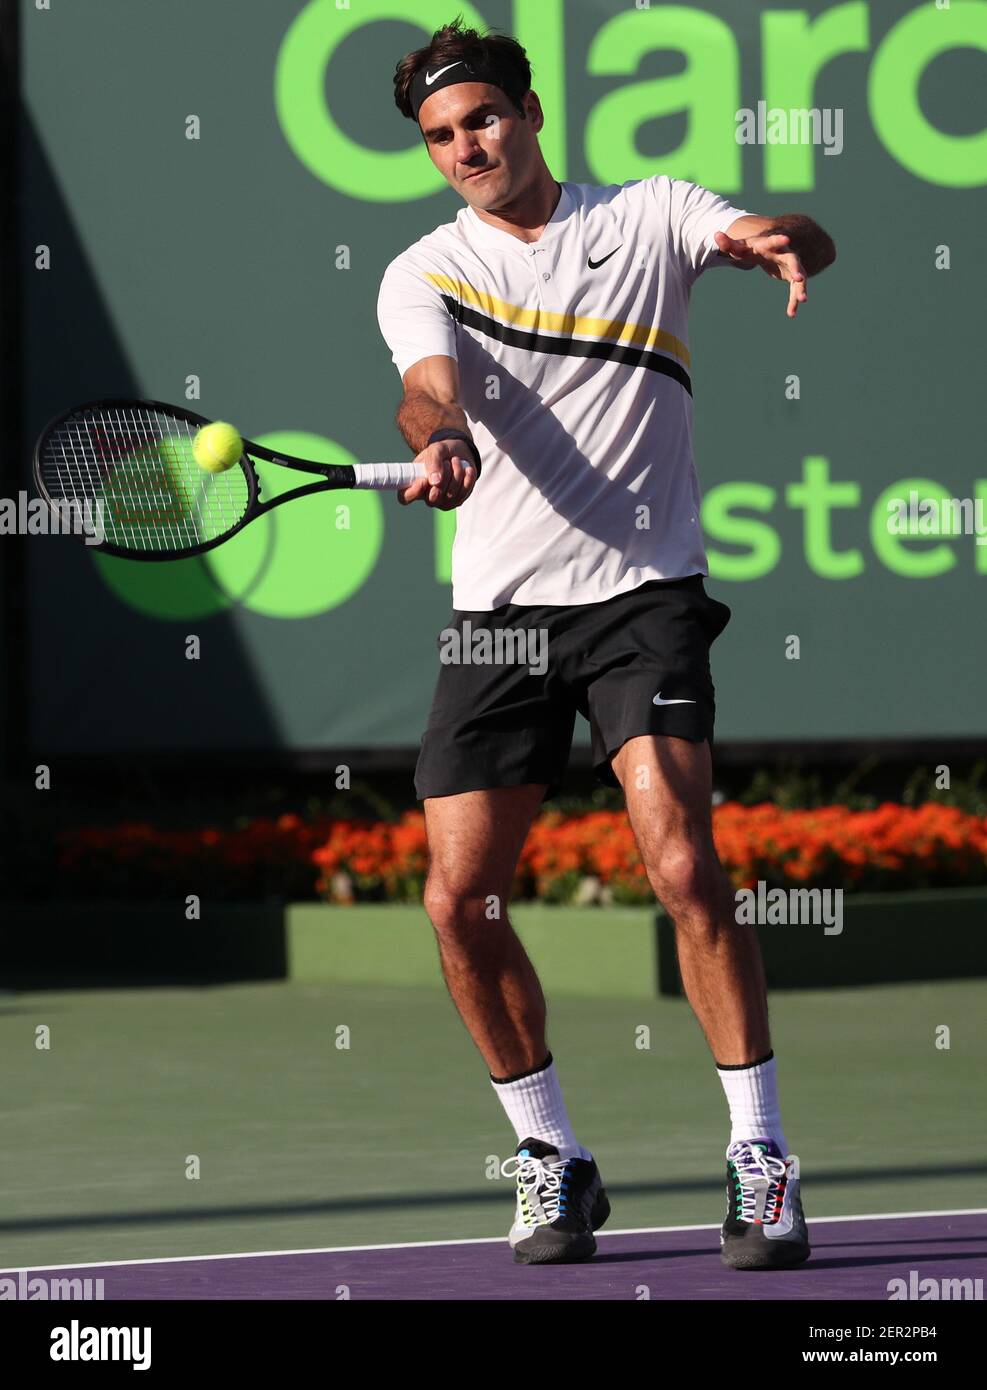 March 24, 2018: Roger Federer from Switzerland plays against Thanasi  Kokkinakis from Australia during an early round of the 2018 Miami Open  presented by Itau professional tennis tournament, played at the Crandon